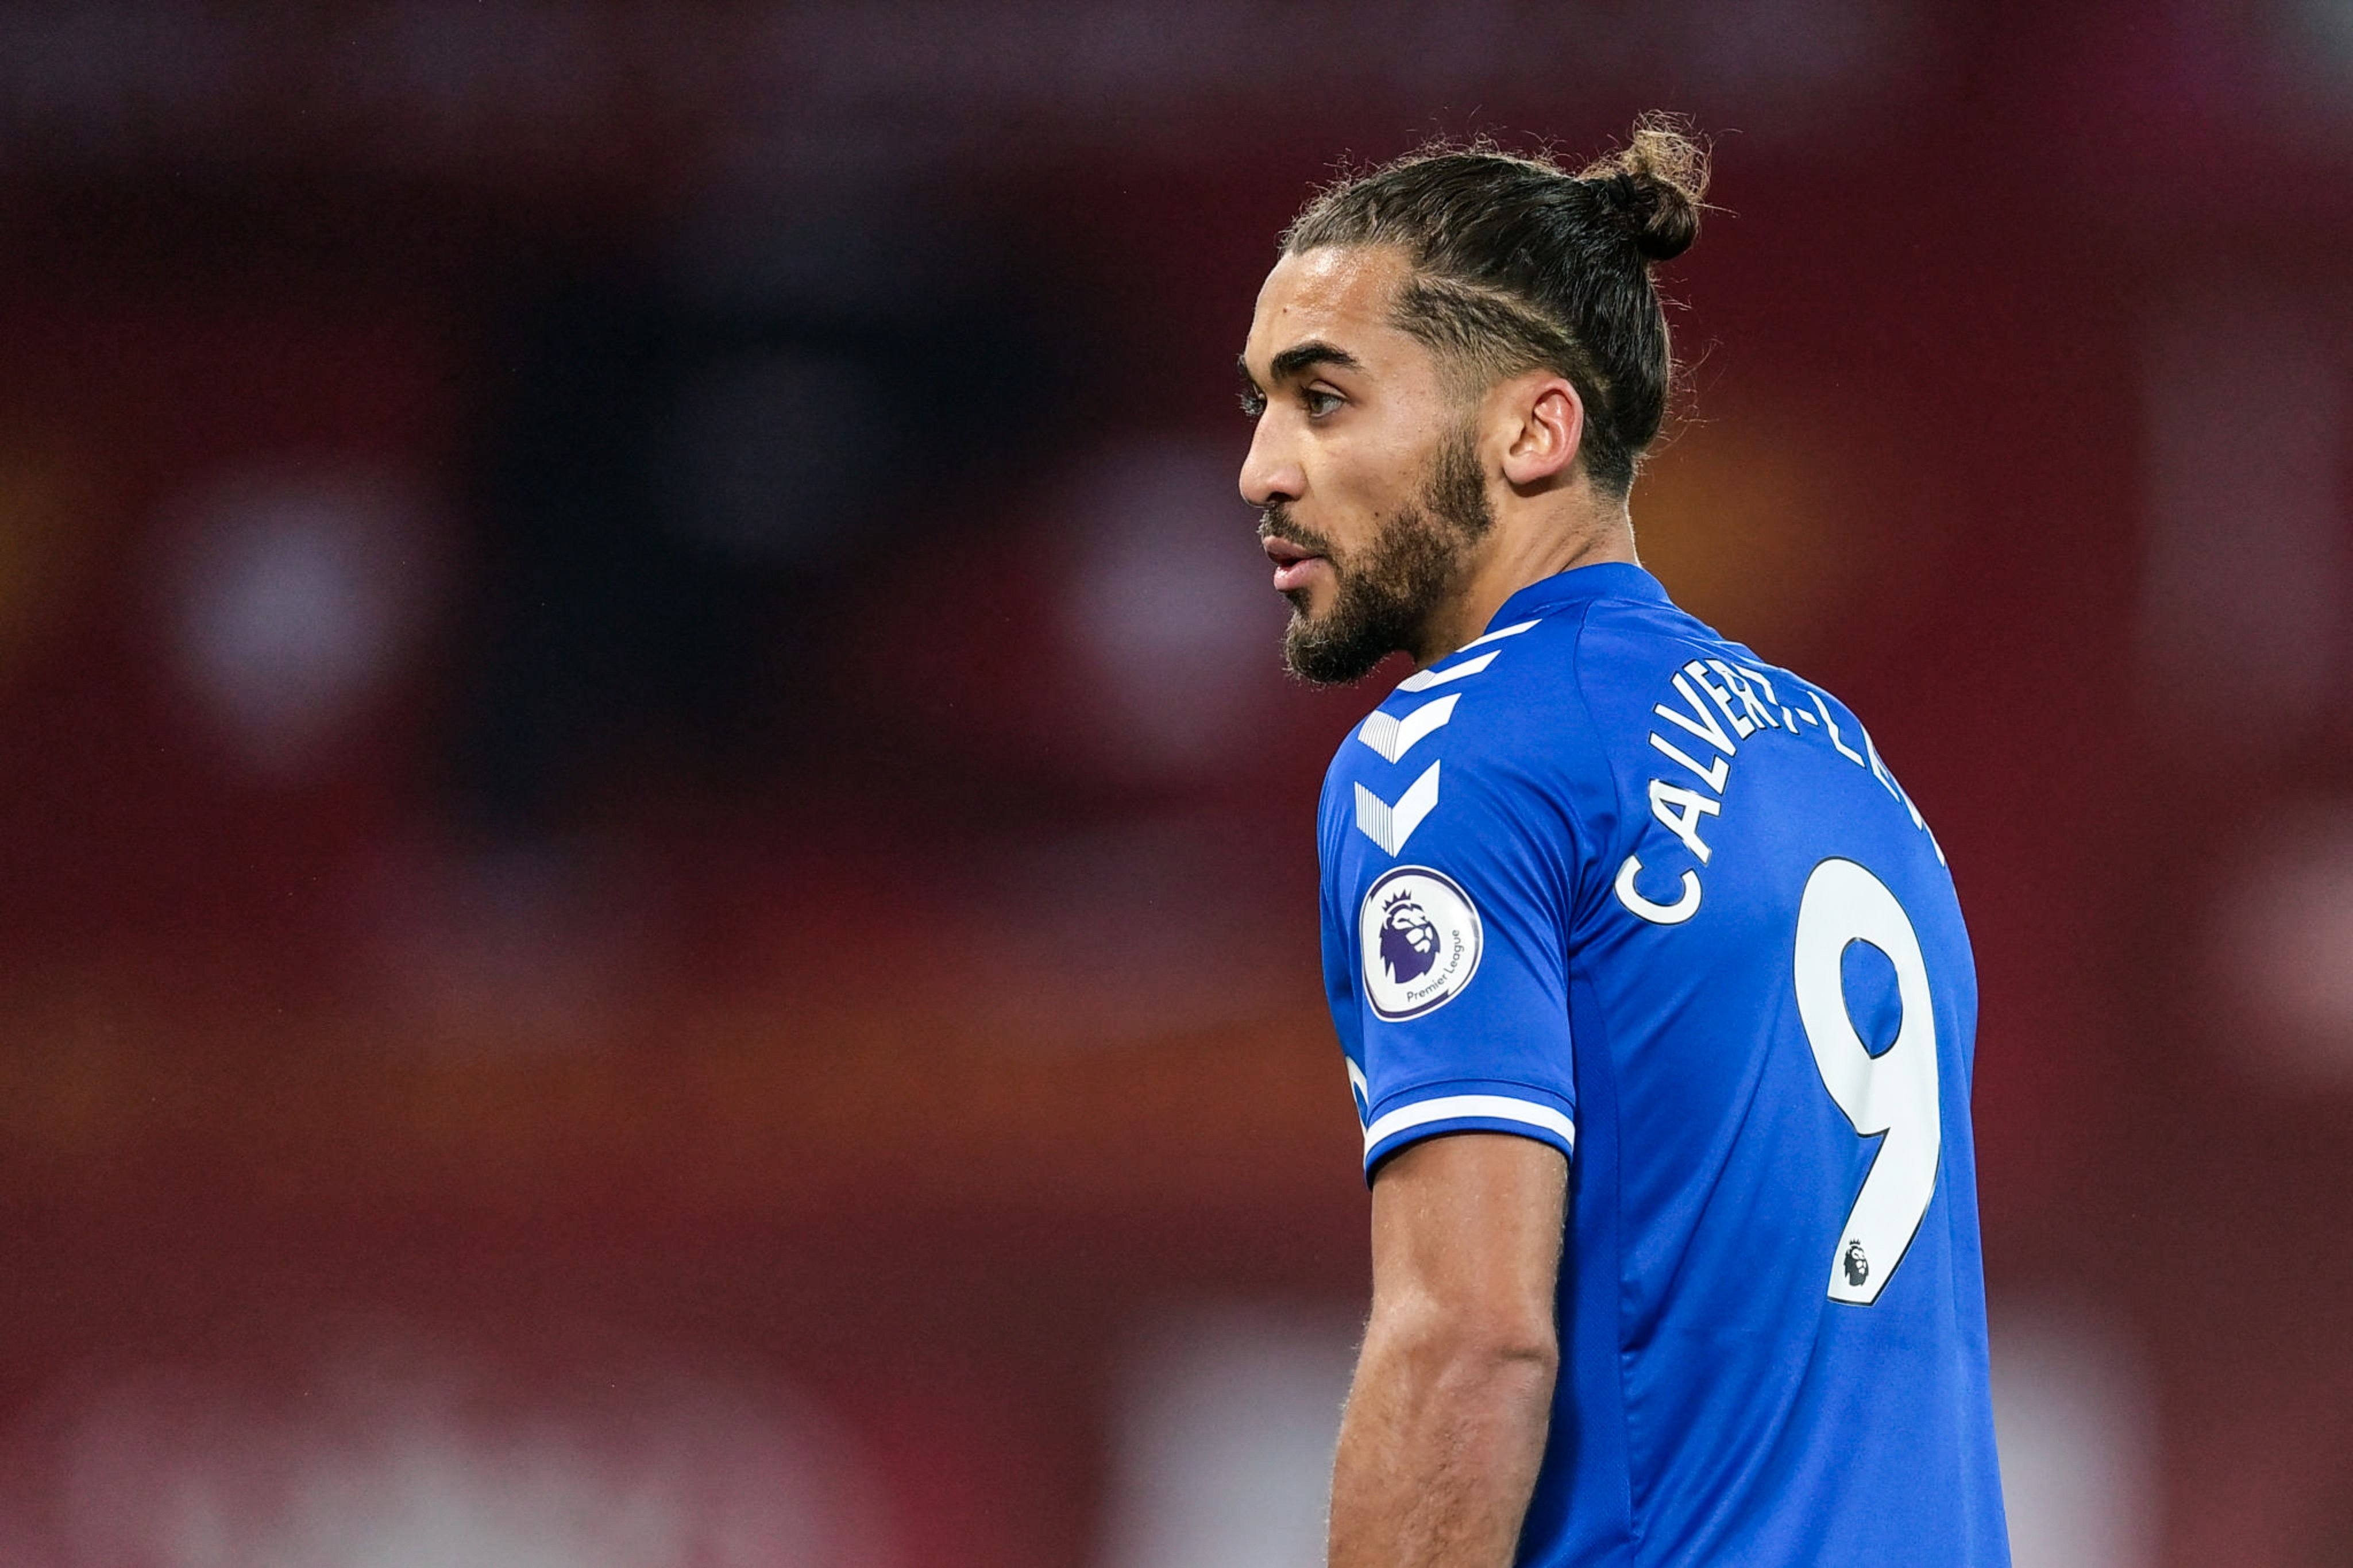 Dominic Calvert-Lewin would be the perfect signing for Manchester United, proclaims Rio Ferdinand